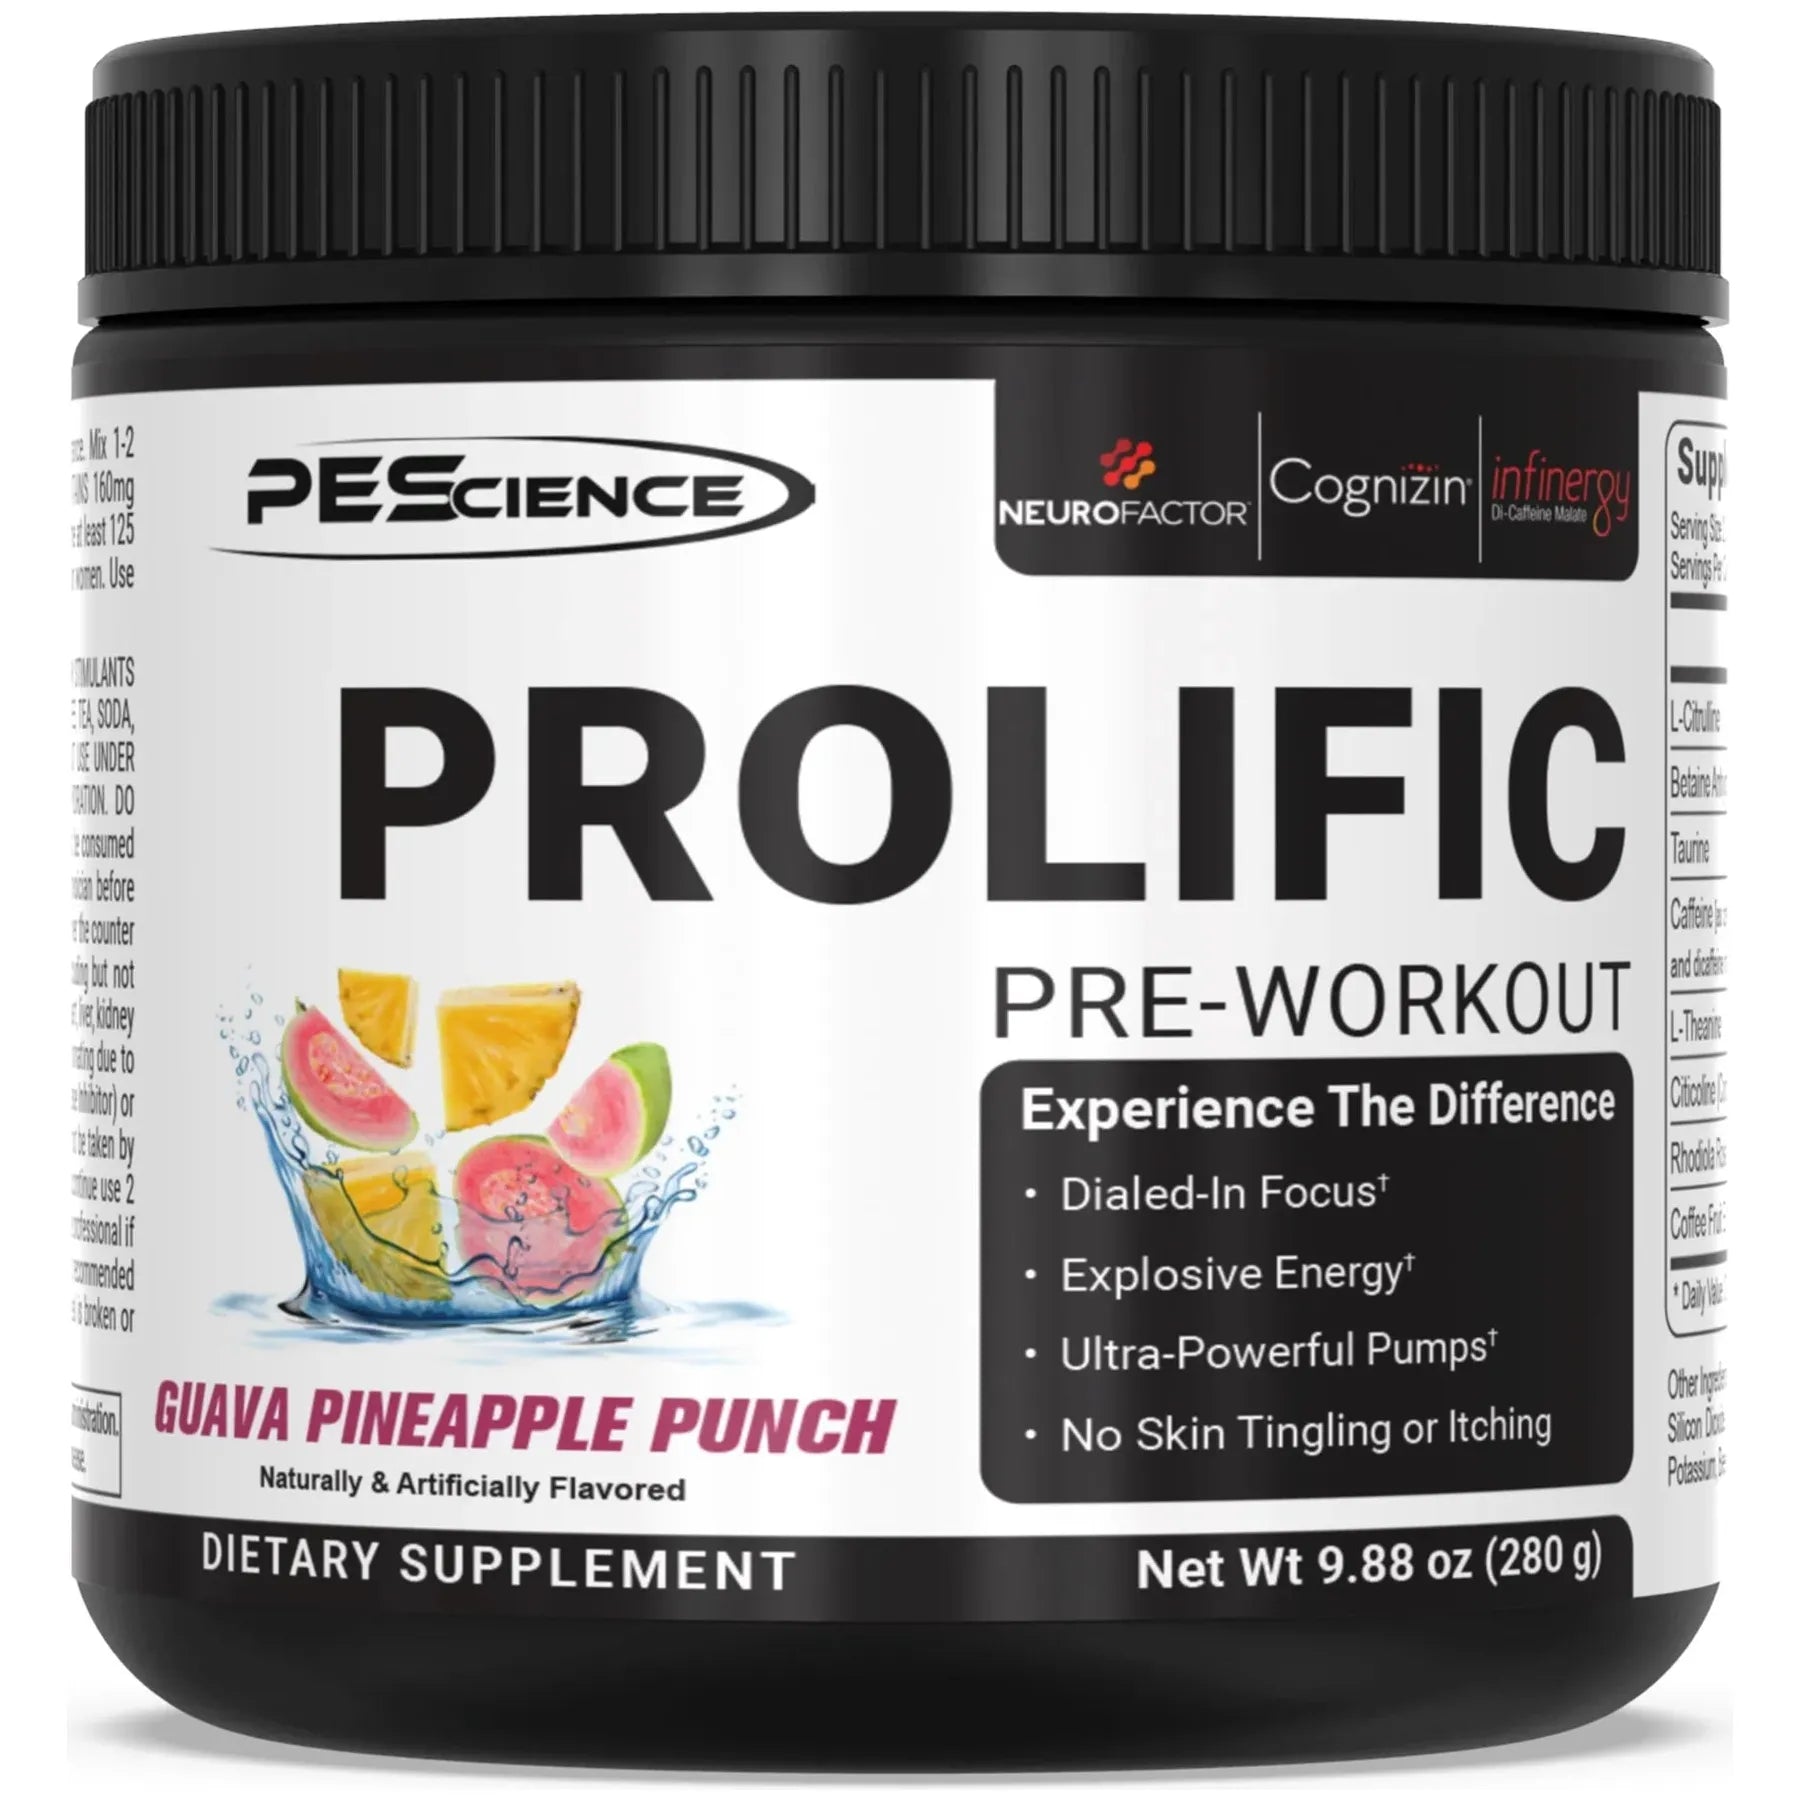 PEScience Prolific Pre-Workout (40 servings) comming-soon-pescience-prolific-pre-workout-40-servings Pre-workout Guava Pineapple Punch PEScience